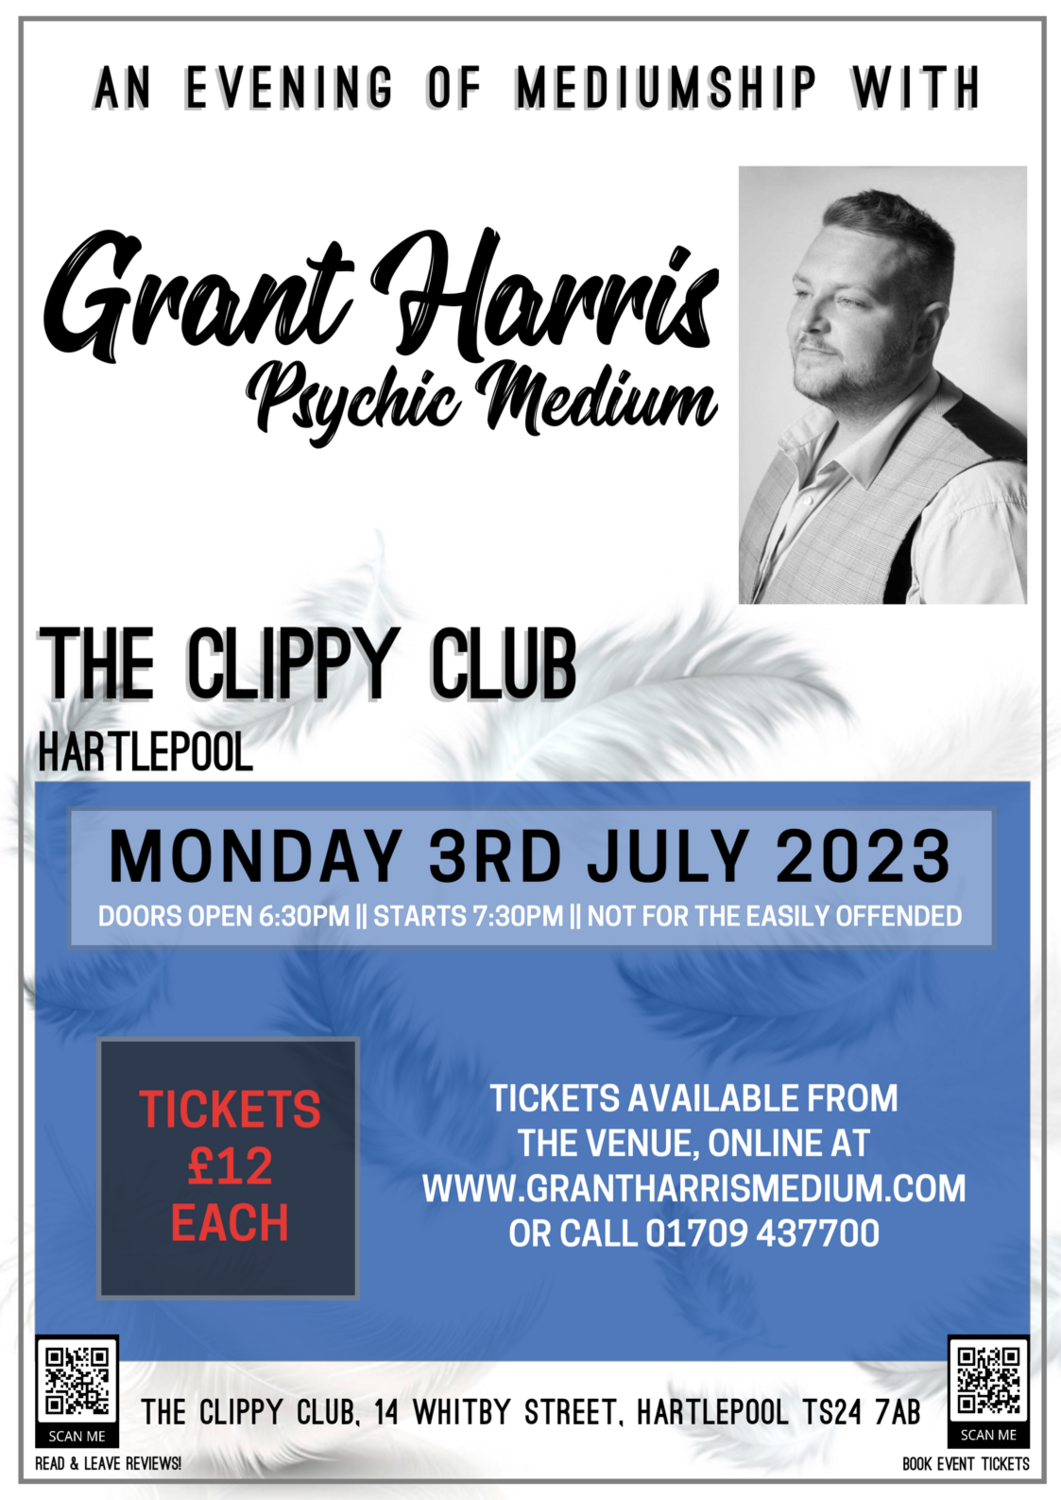 The Clippy Club, Hartlepool,  Monday 3rd July 2023